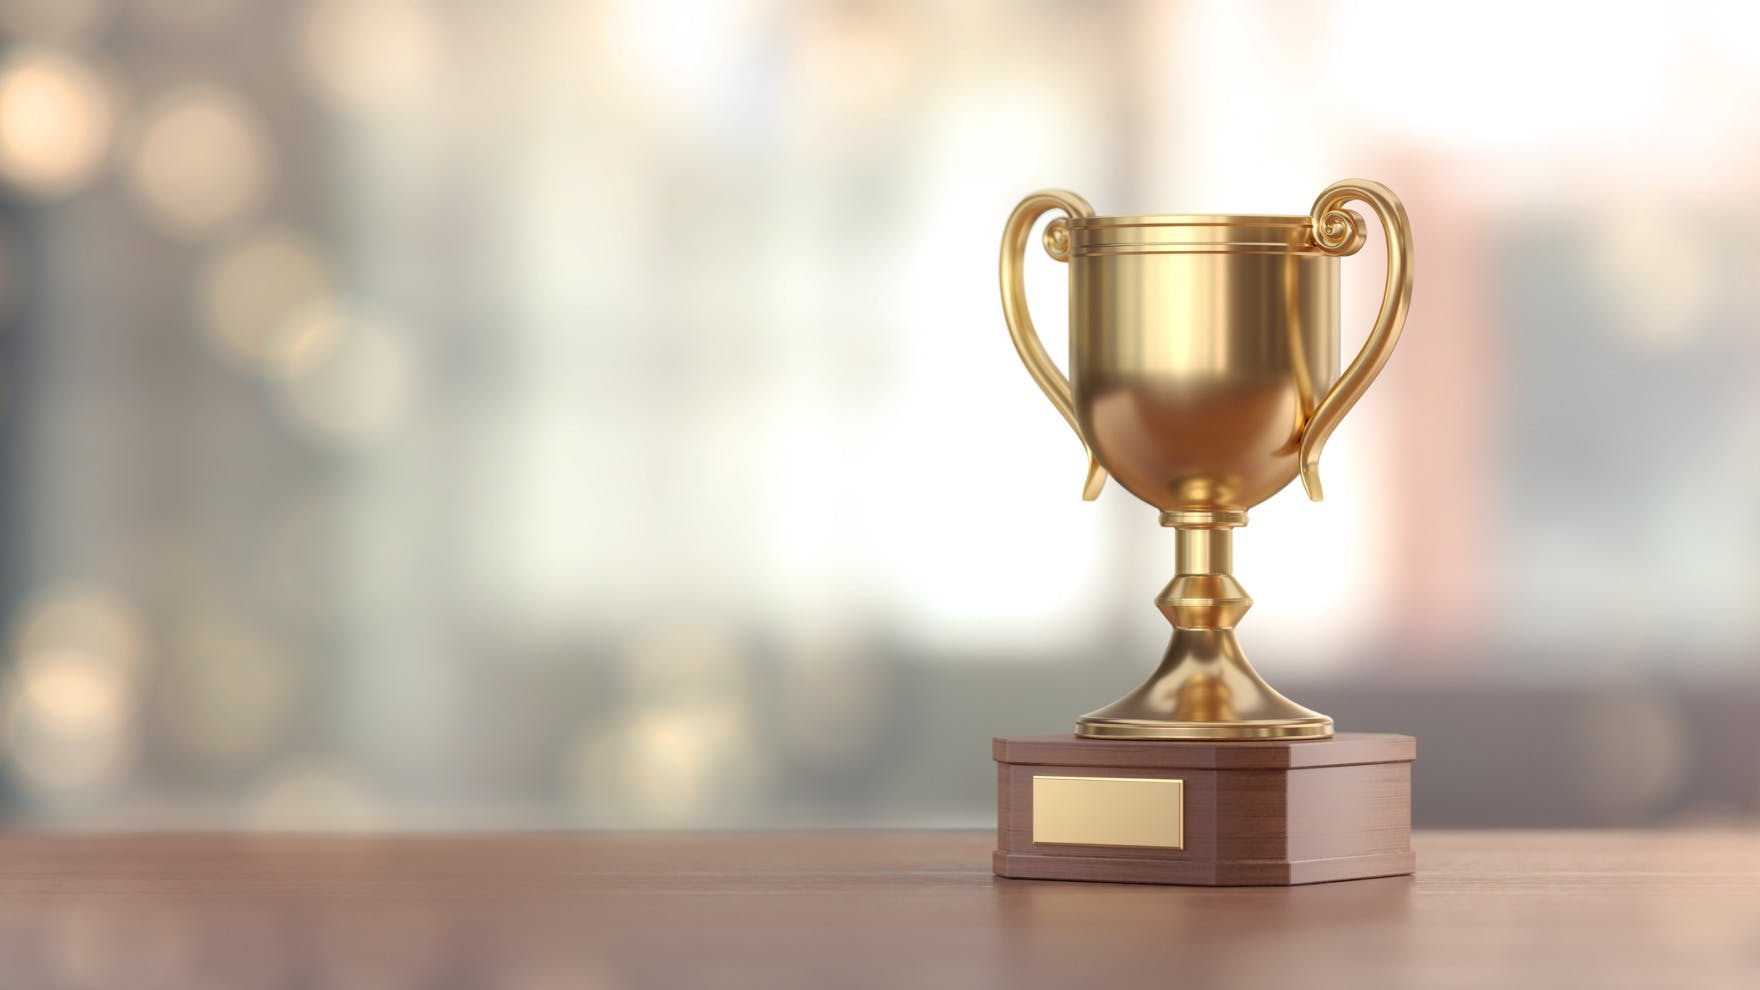 22 Sales Contest Ideas to Motivate Your Team